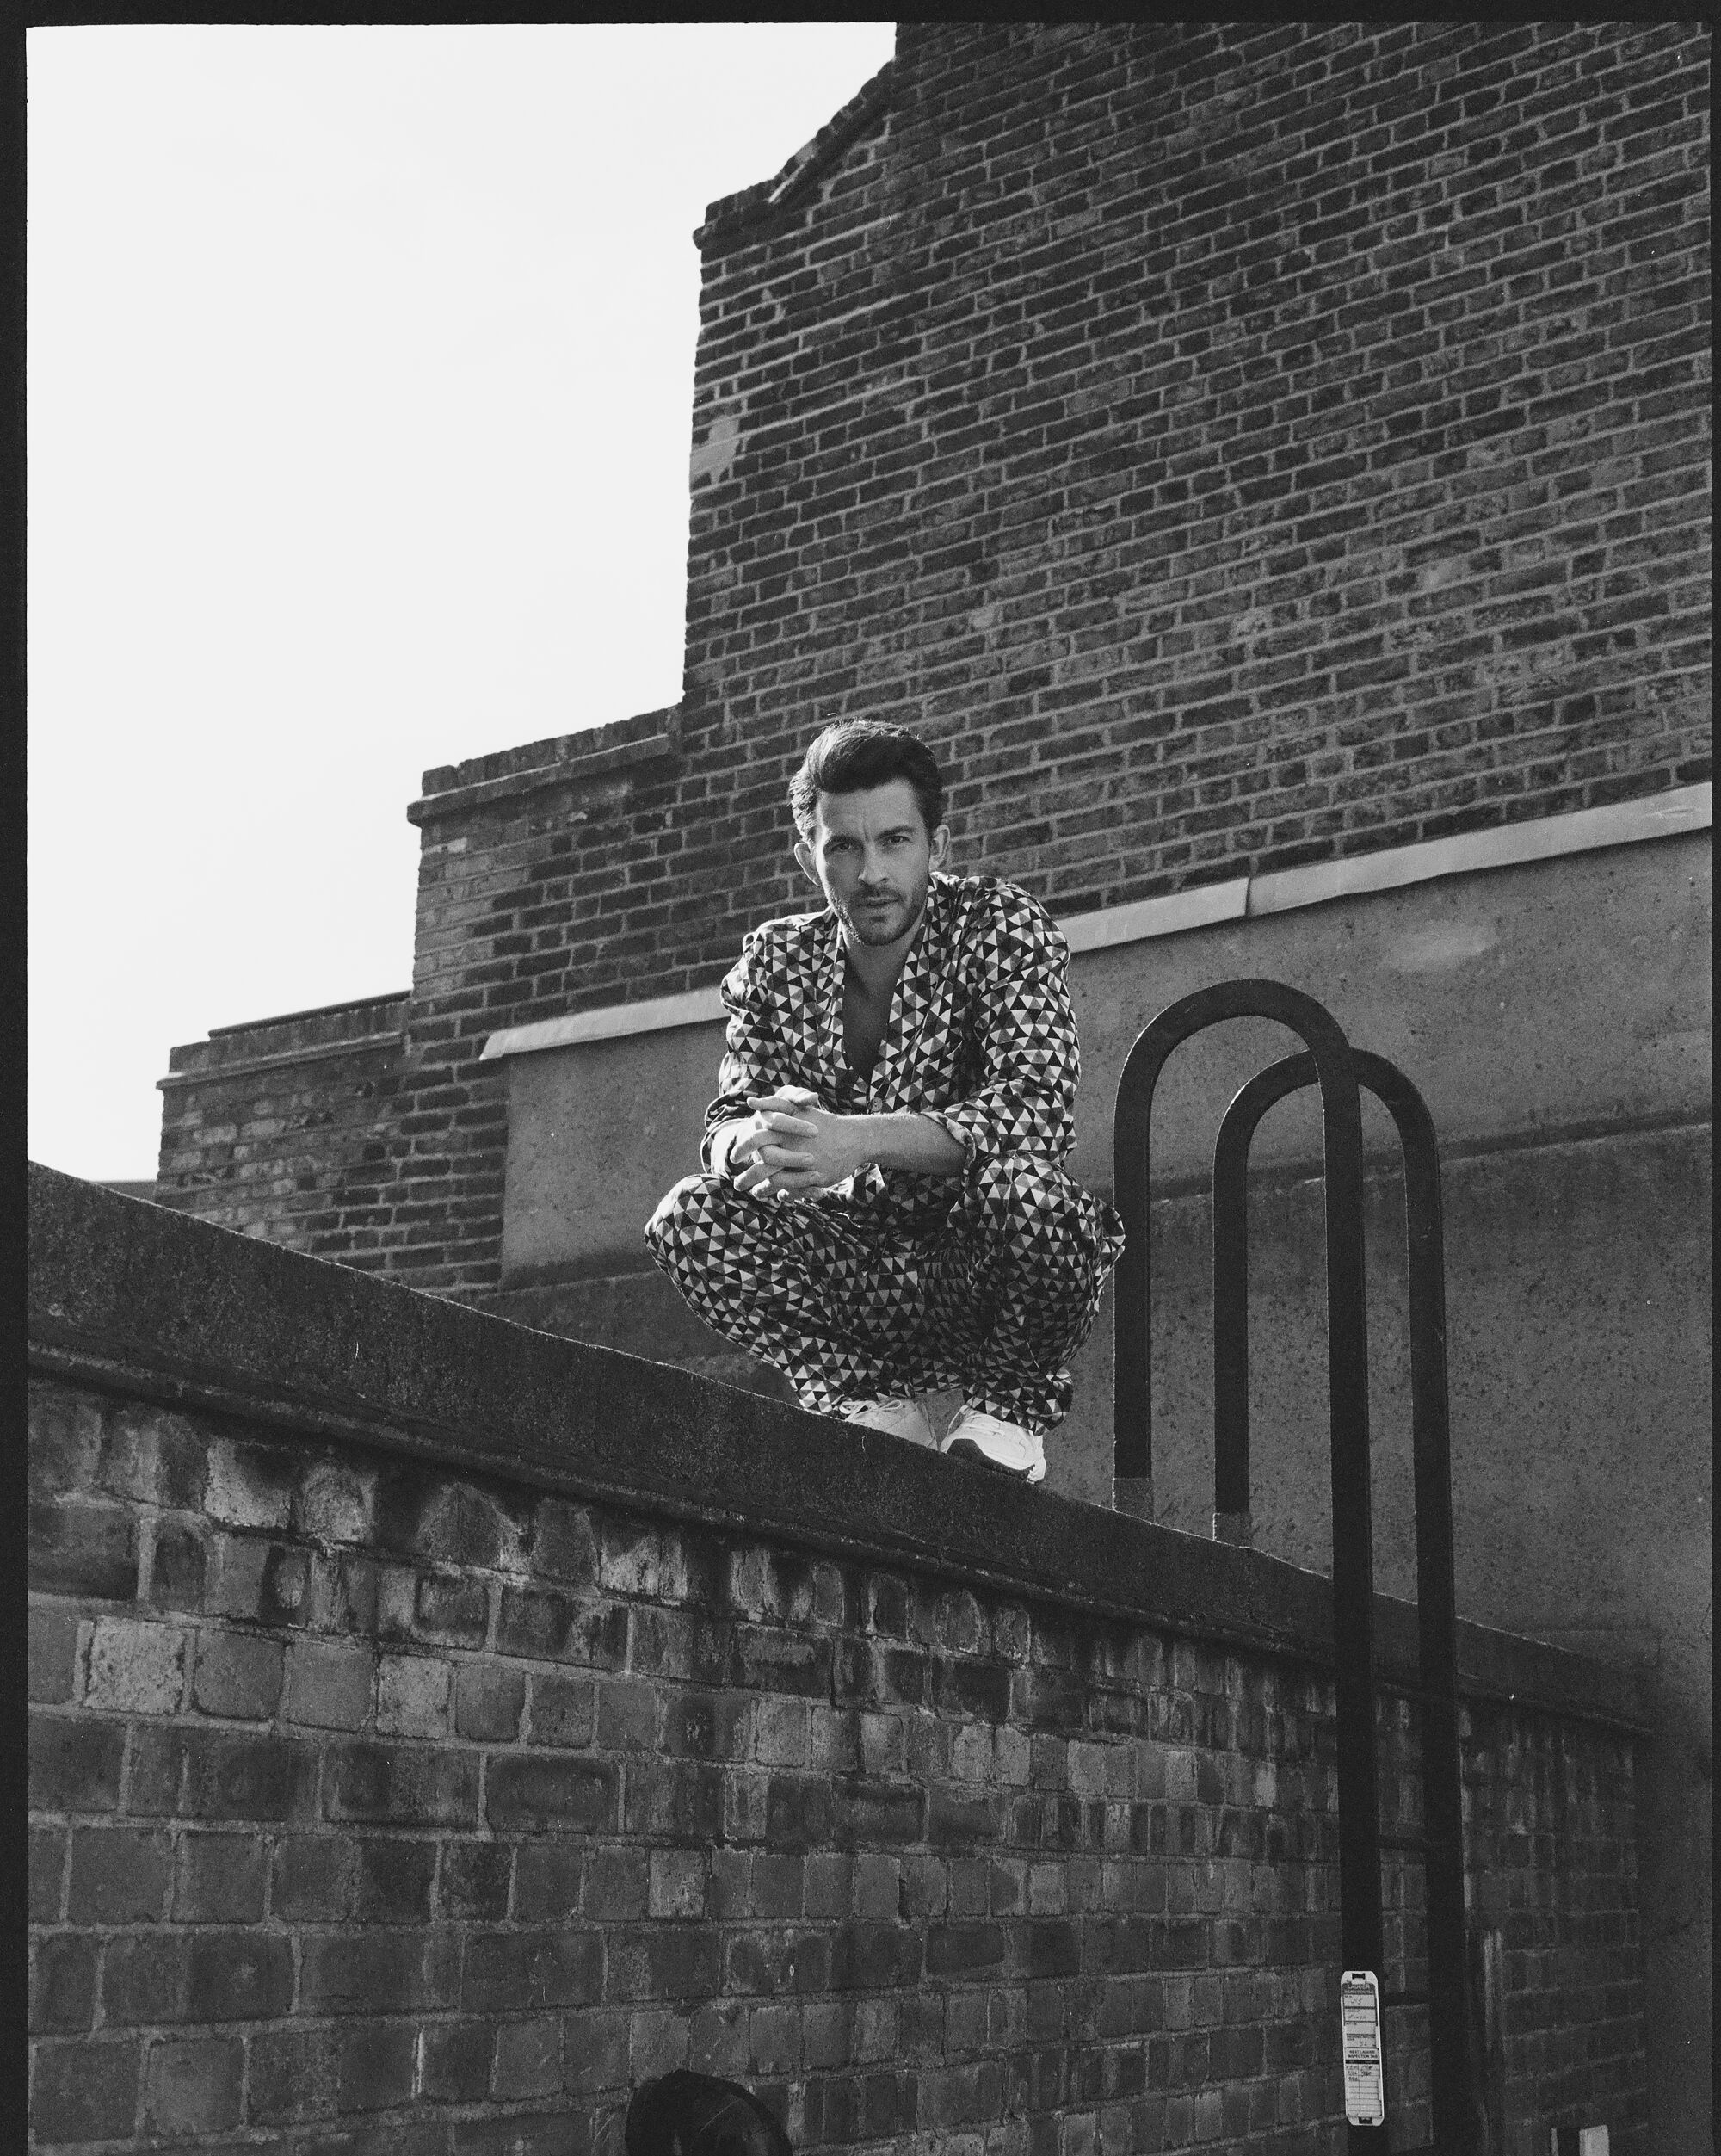 A man crouches on a rooftop wearing patterned, silk clothing.